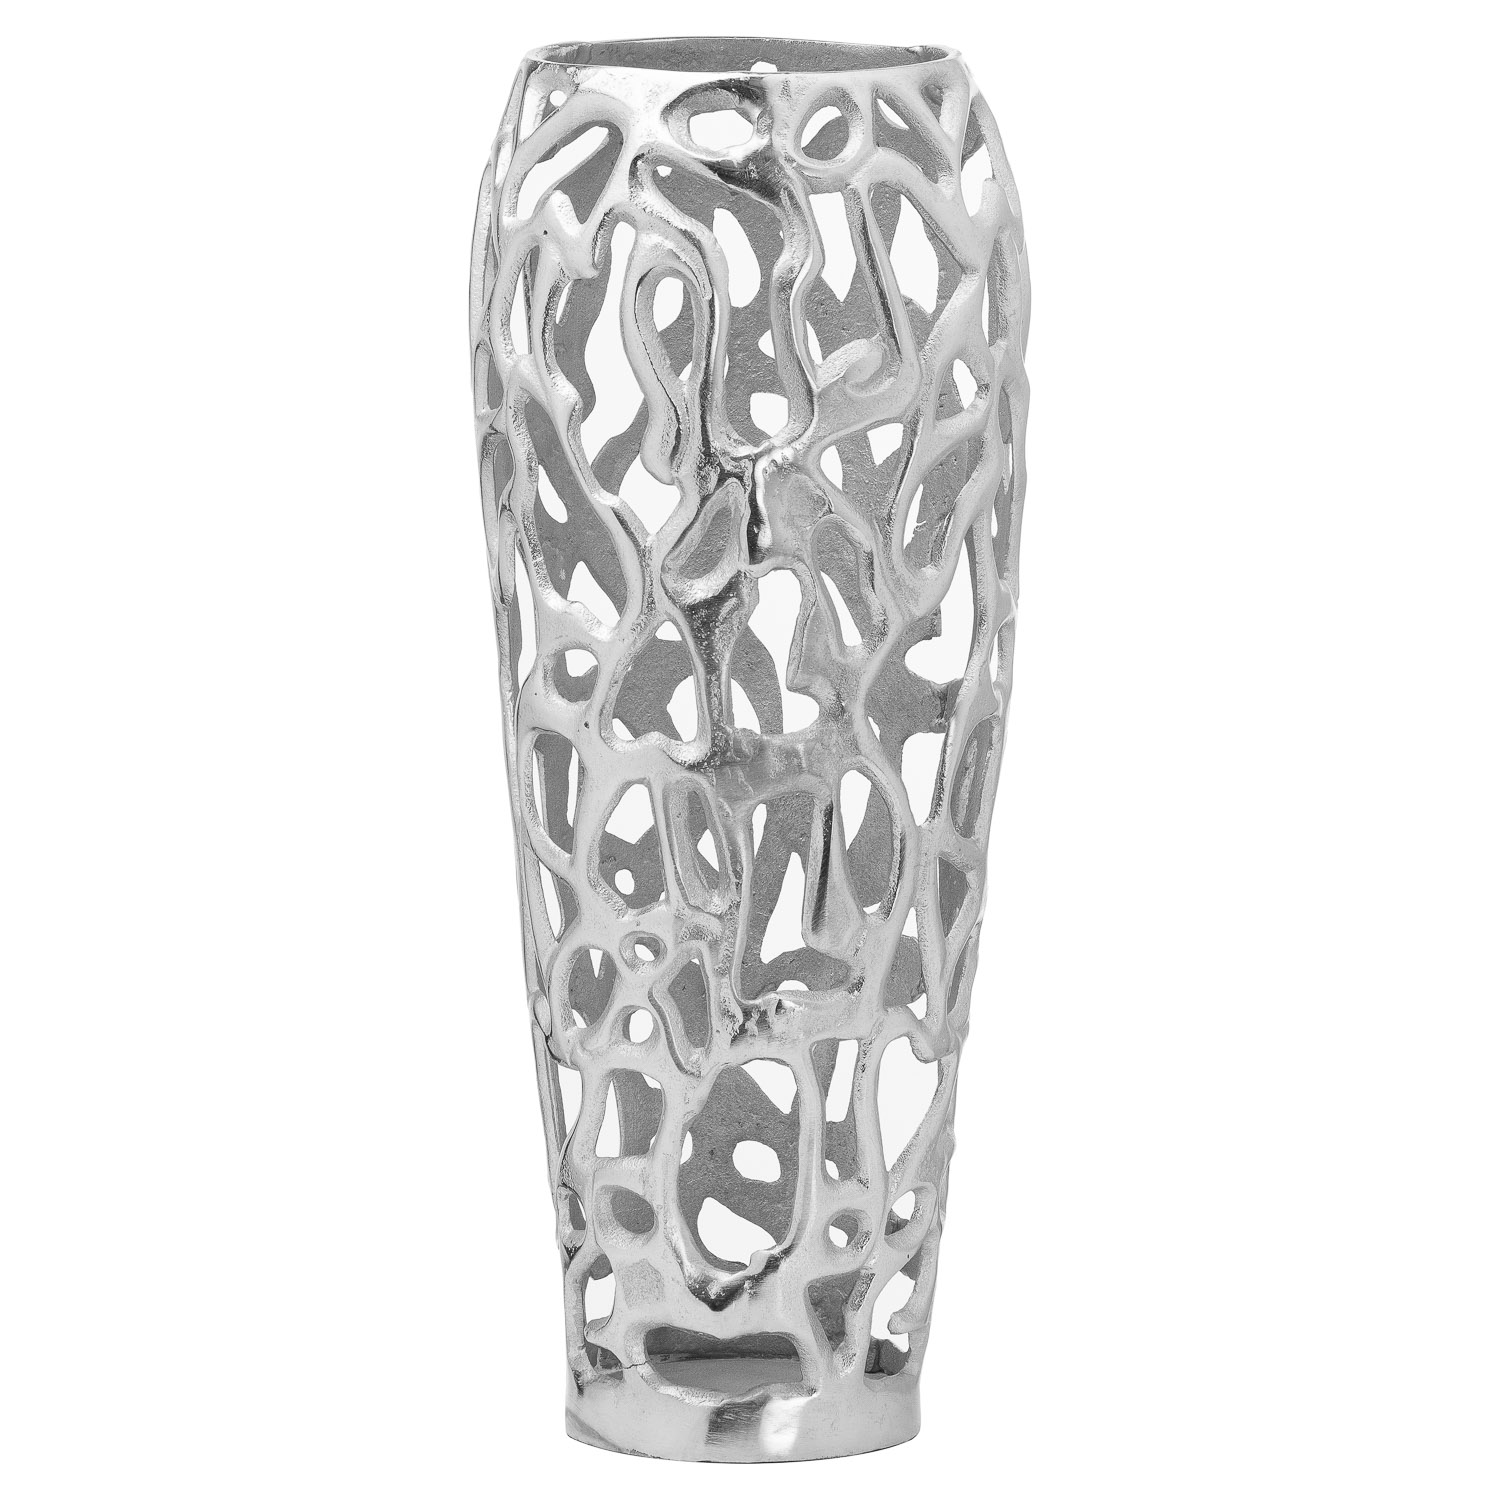 Ohlson Silver Perforated Coral Inspired Vase - Image 1